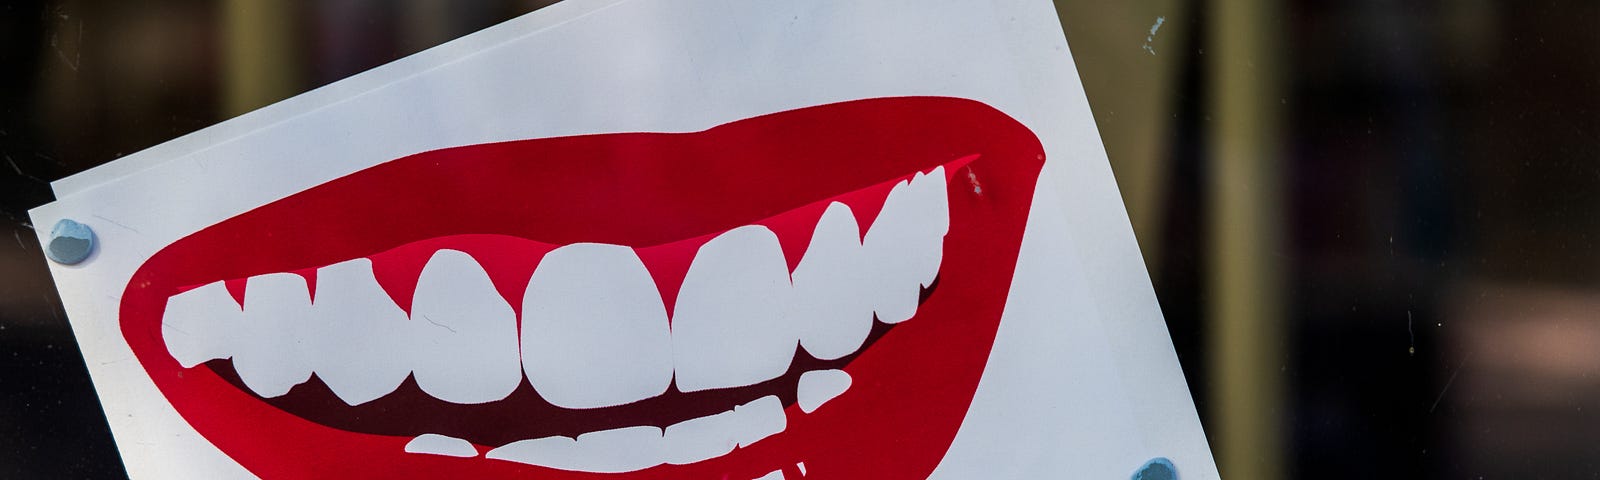 Cartoonish drawing of bright red lips with giant white teeth on white card